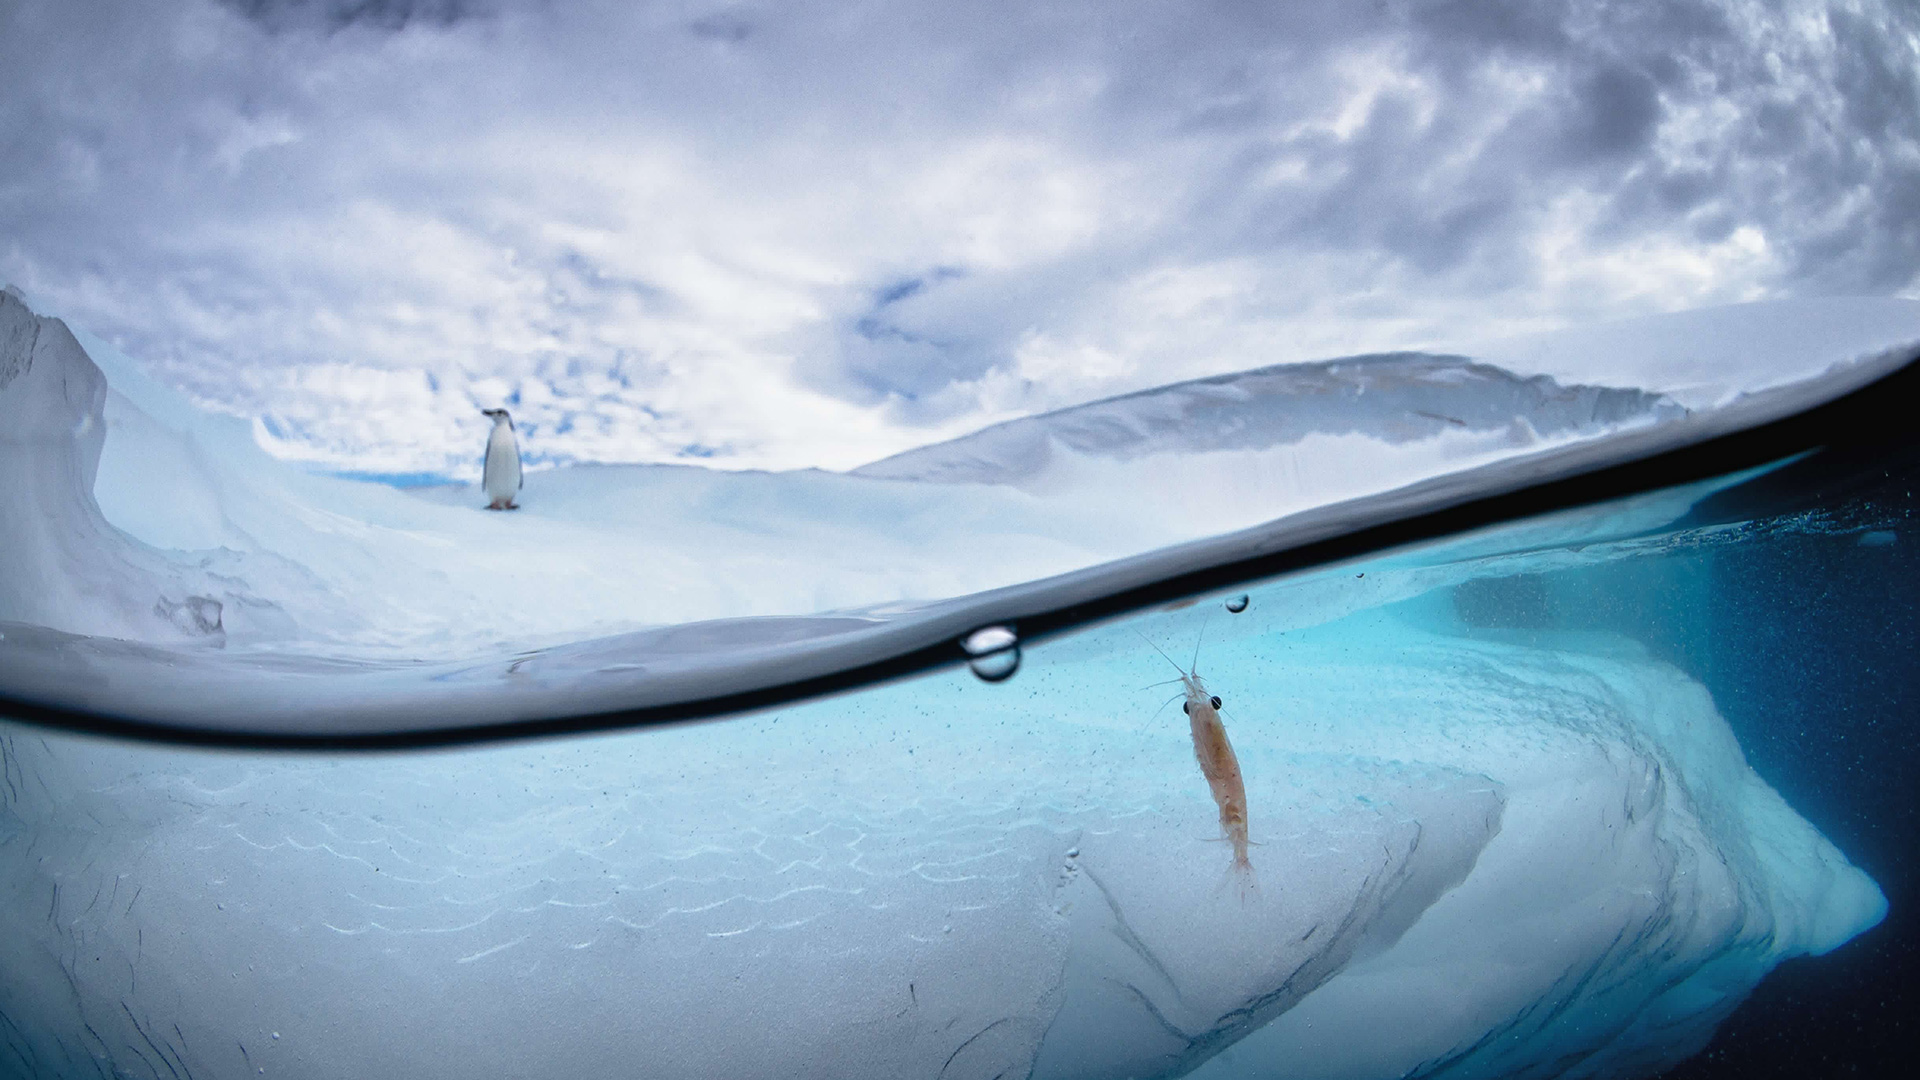 Justin Hofman’s photo is the National Geographic Photo of the Day!